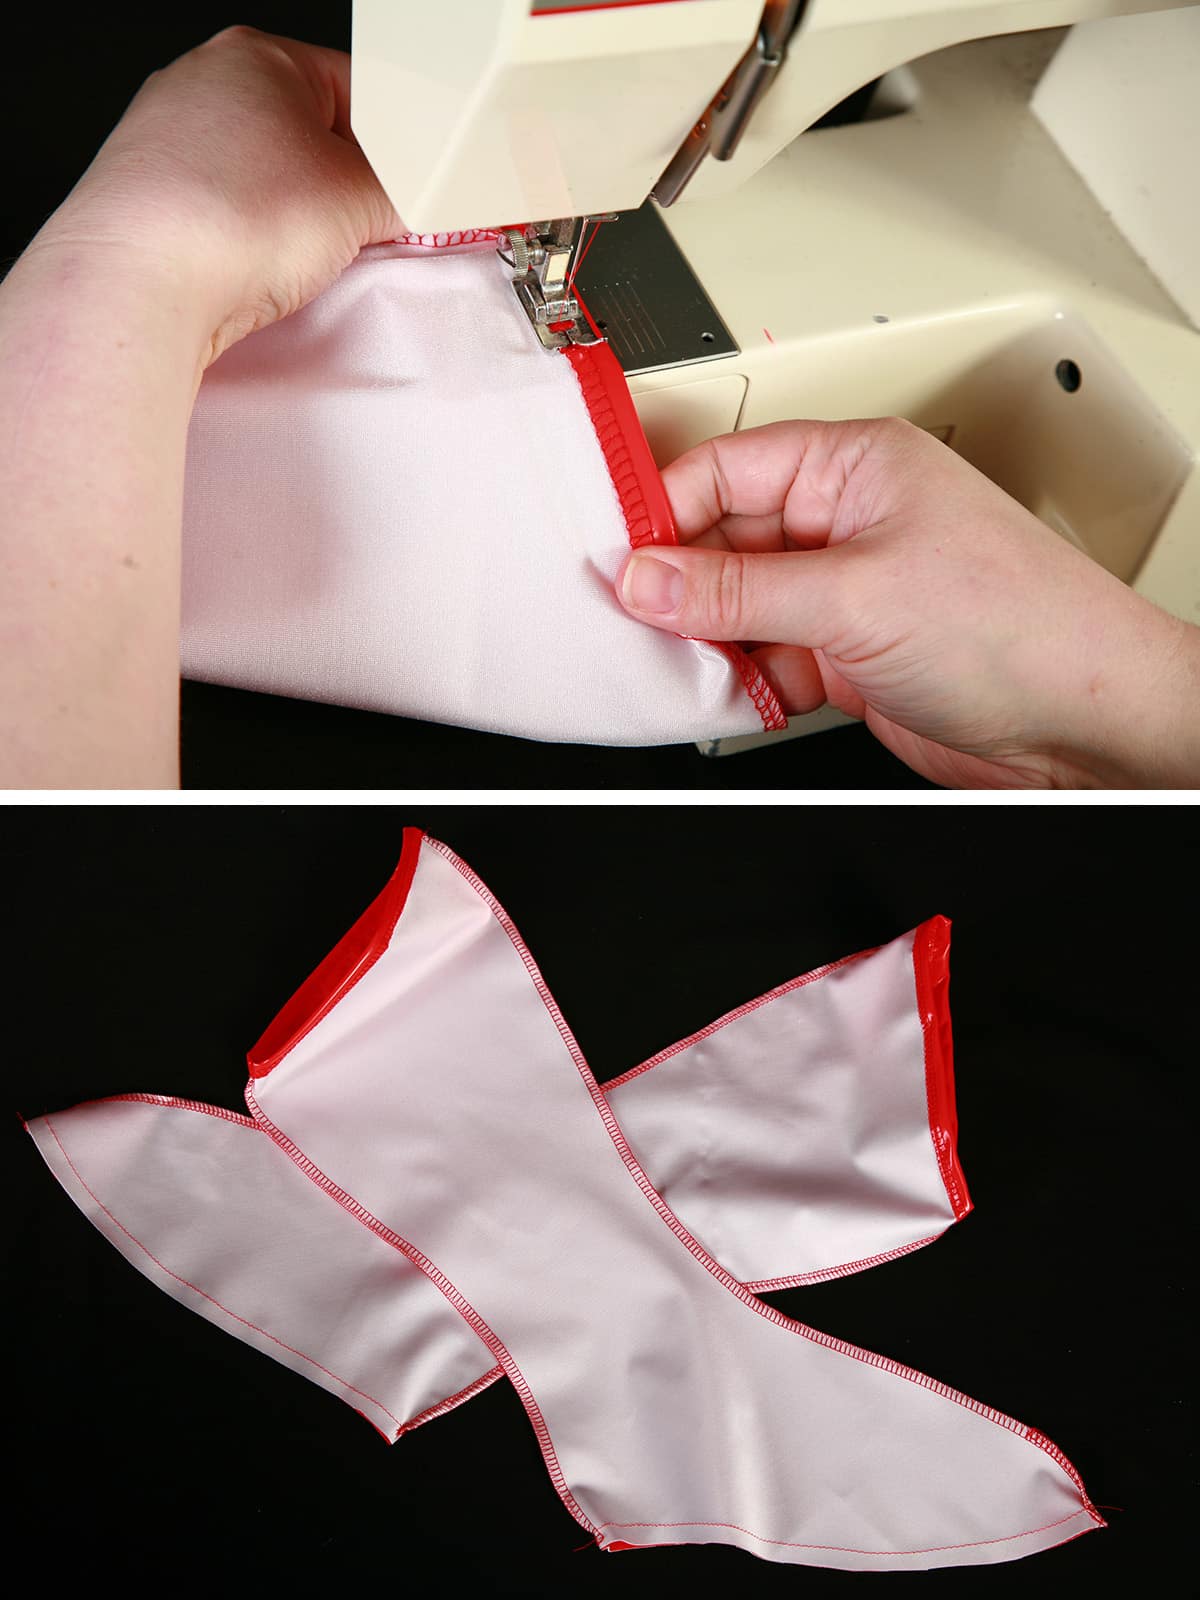 A two part compilation image showing elastic being sewn into a red and white spandex boot cover.